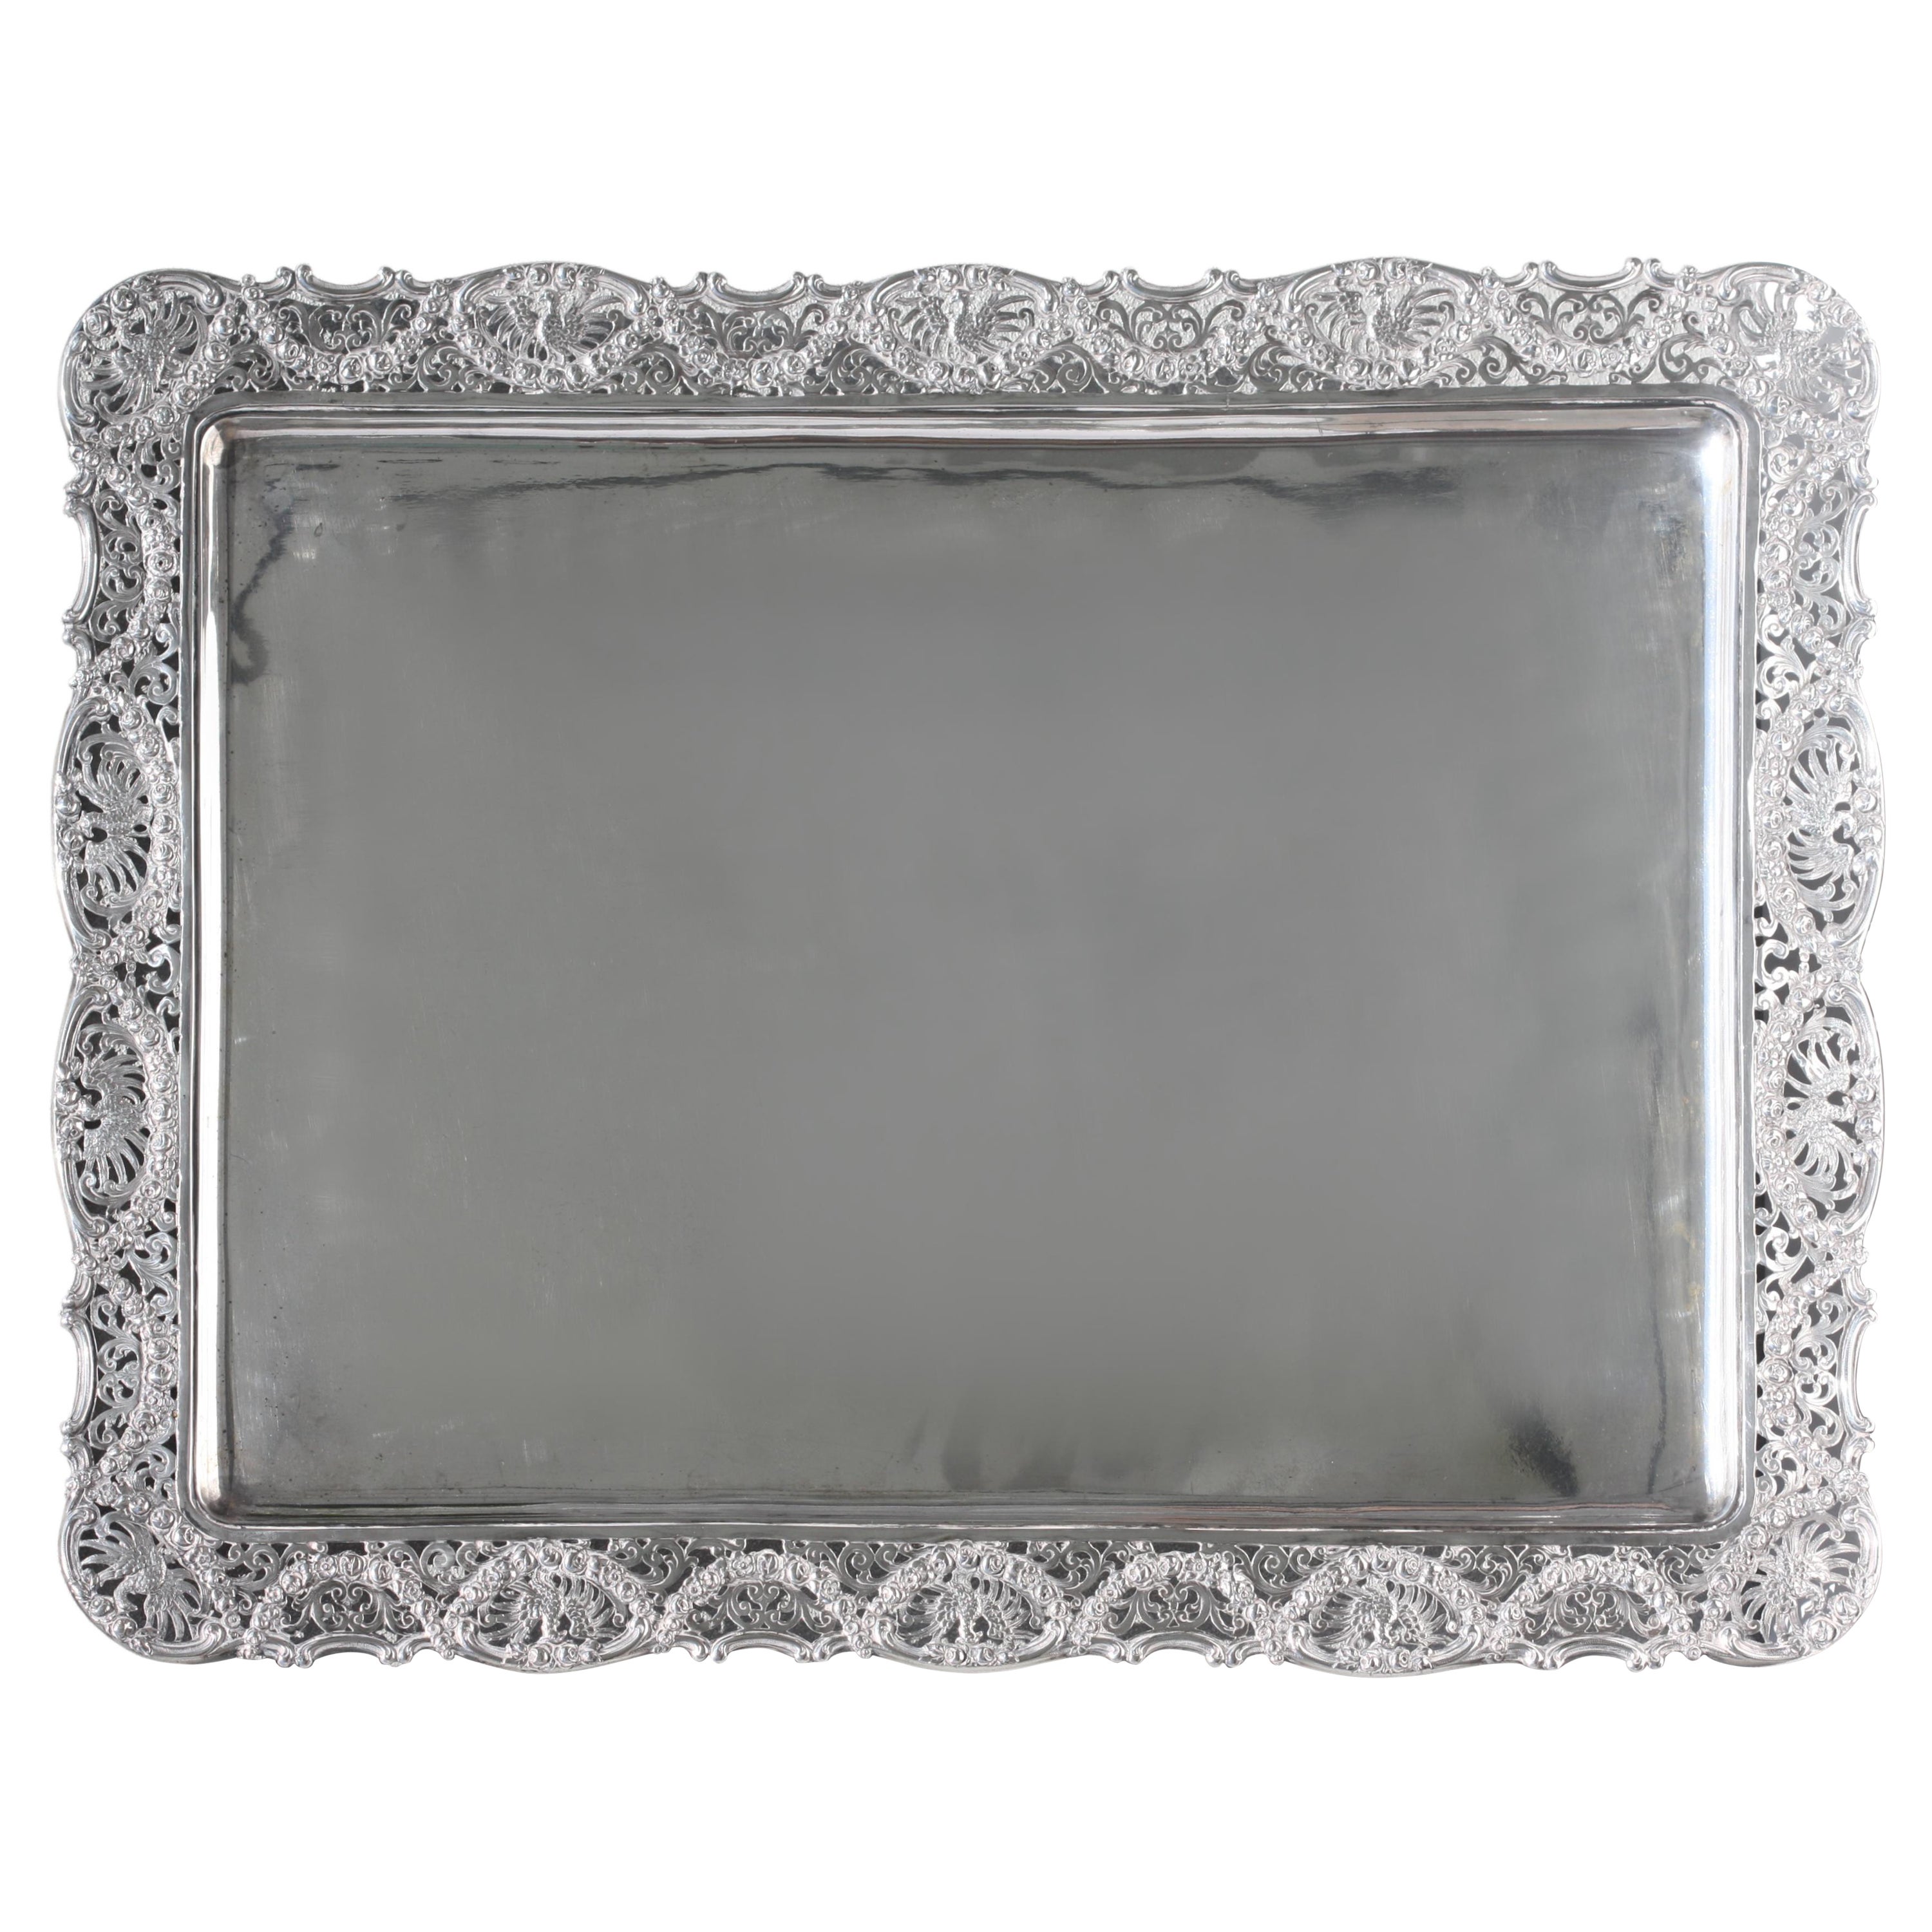  Continental Silver Rectangular Tray, Probably German For Sale